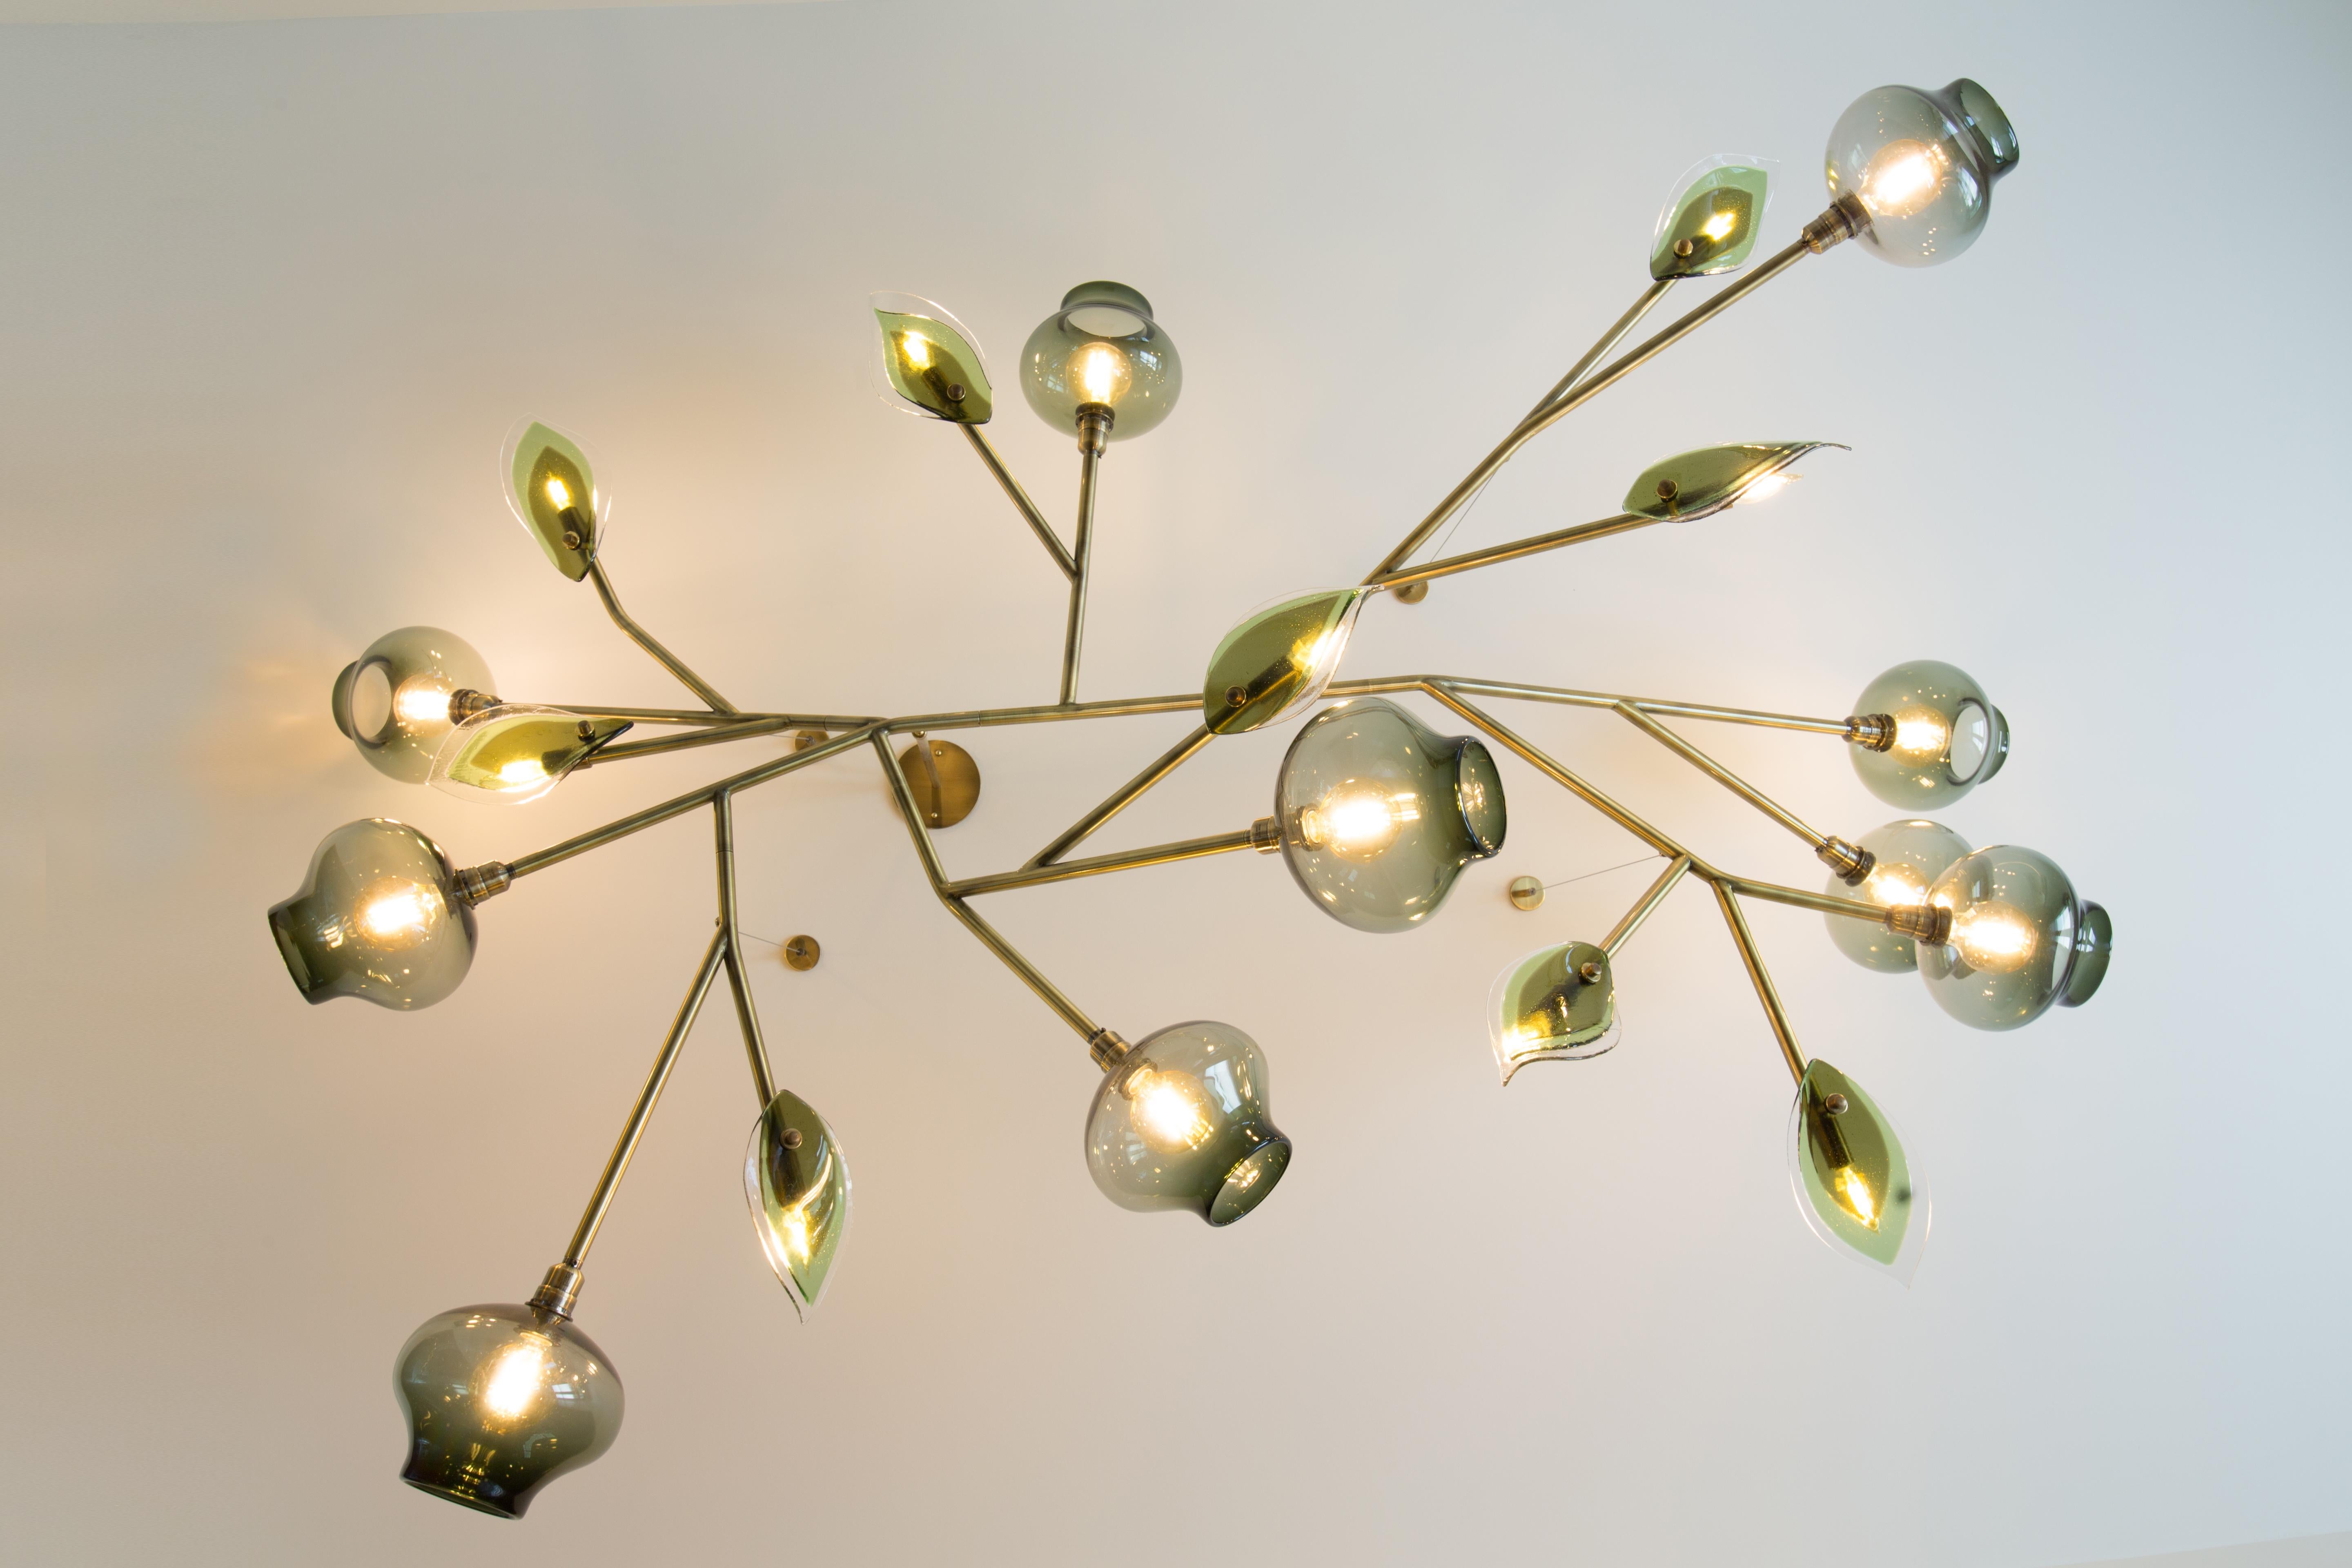 Unique leaf chandelier by Feyzstudio
Dimensions: W 213.3 x D 76 x H 45.7 cm
Materials: Brass, steel, glass.
Glass color, metal finish, dimensions can all be customized as our pieces are made-to-order.

FEYZ Studio is a New York based,